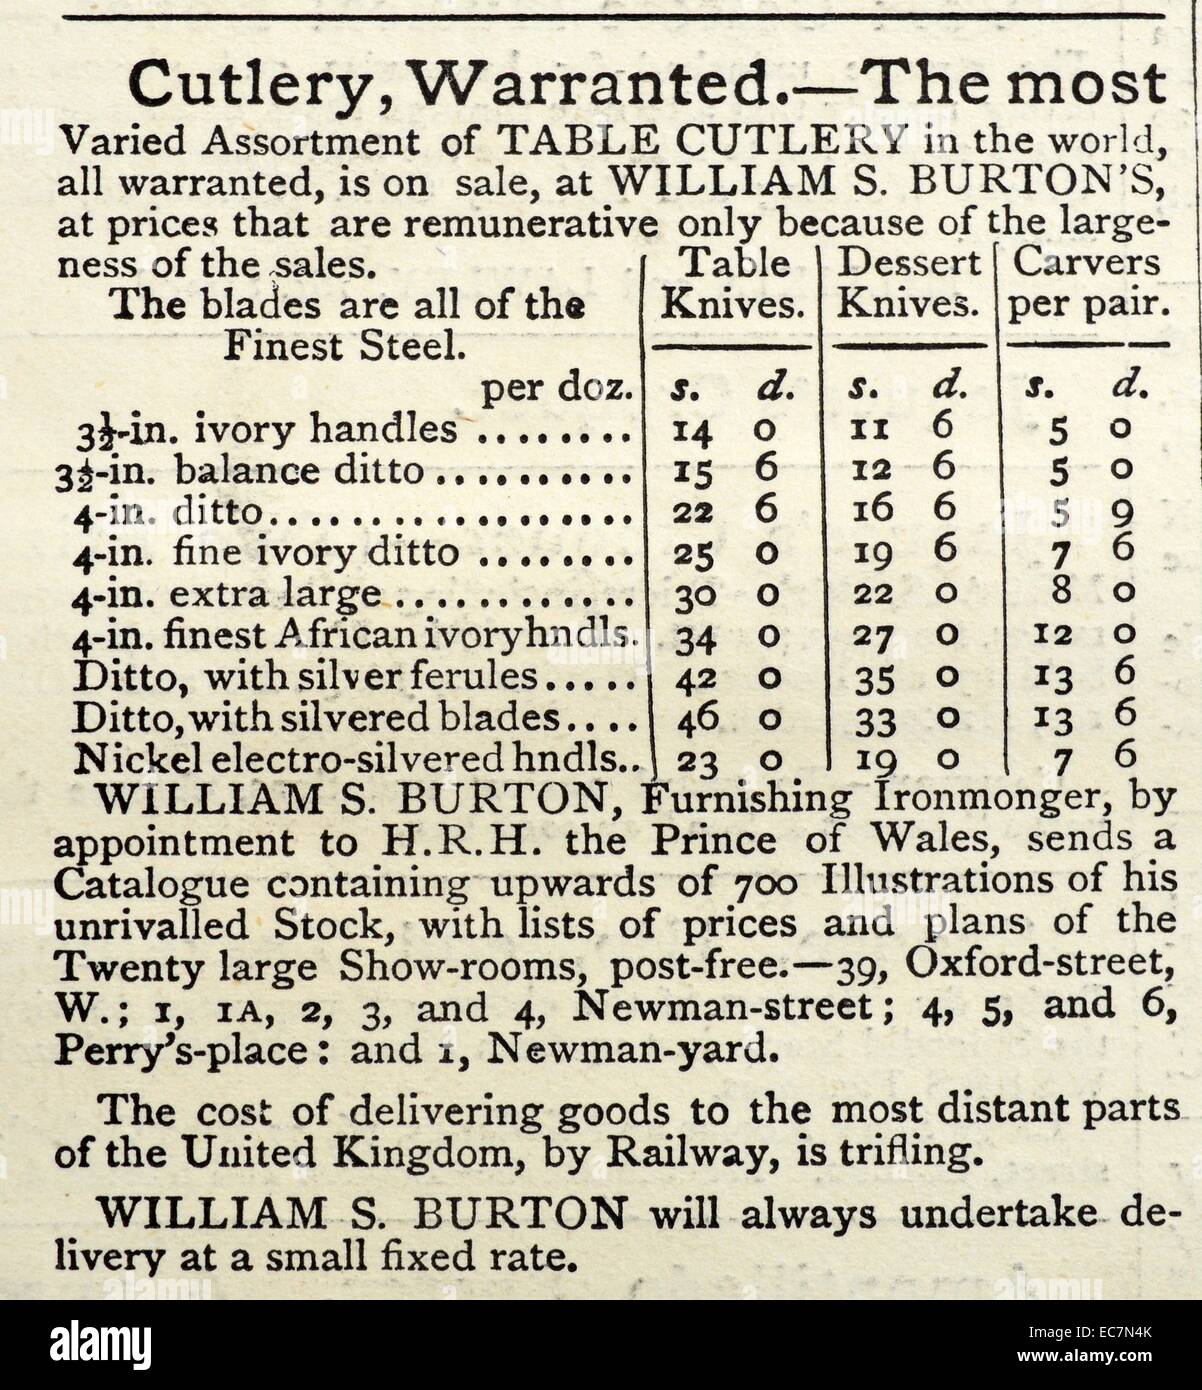 Advert in an English newspaper for stainless steel cutlery. Advert placed by the William Burton company. Adverts shows a price list for items including, ivory handles. 19th Century saw the growth of British steel industry, serving in industrial and domestic markets. Stock Photo